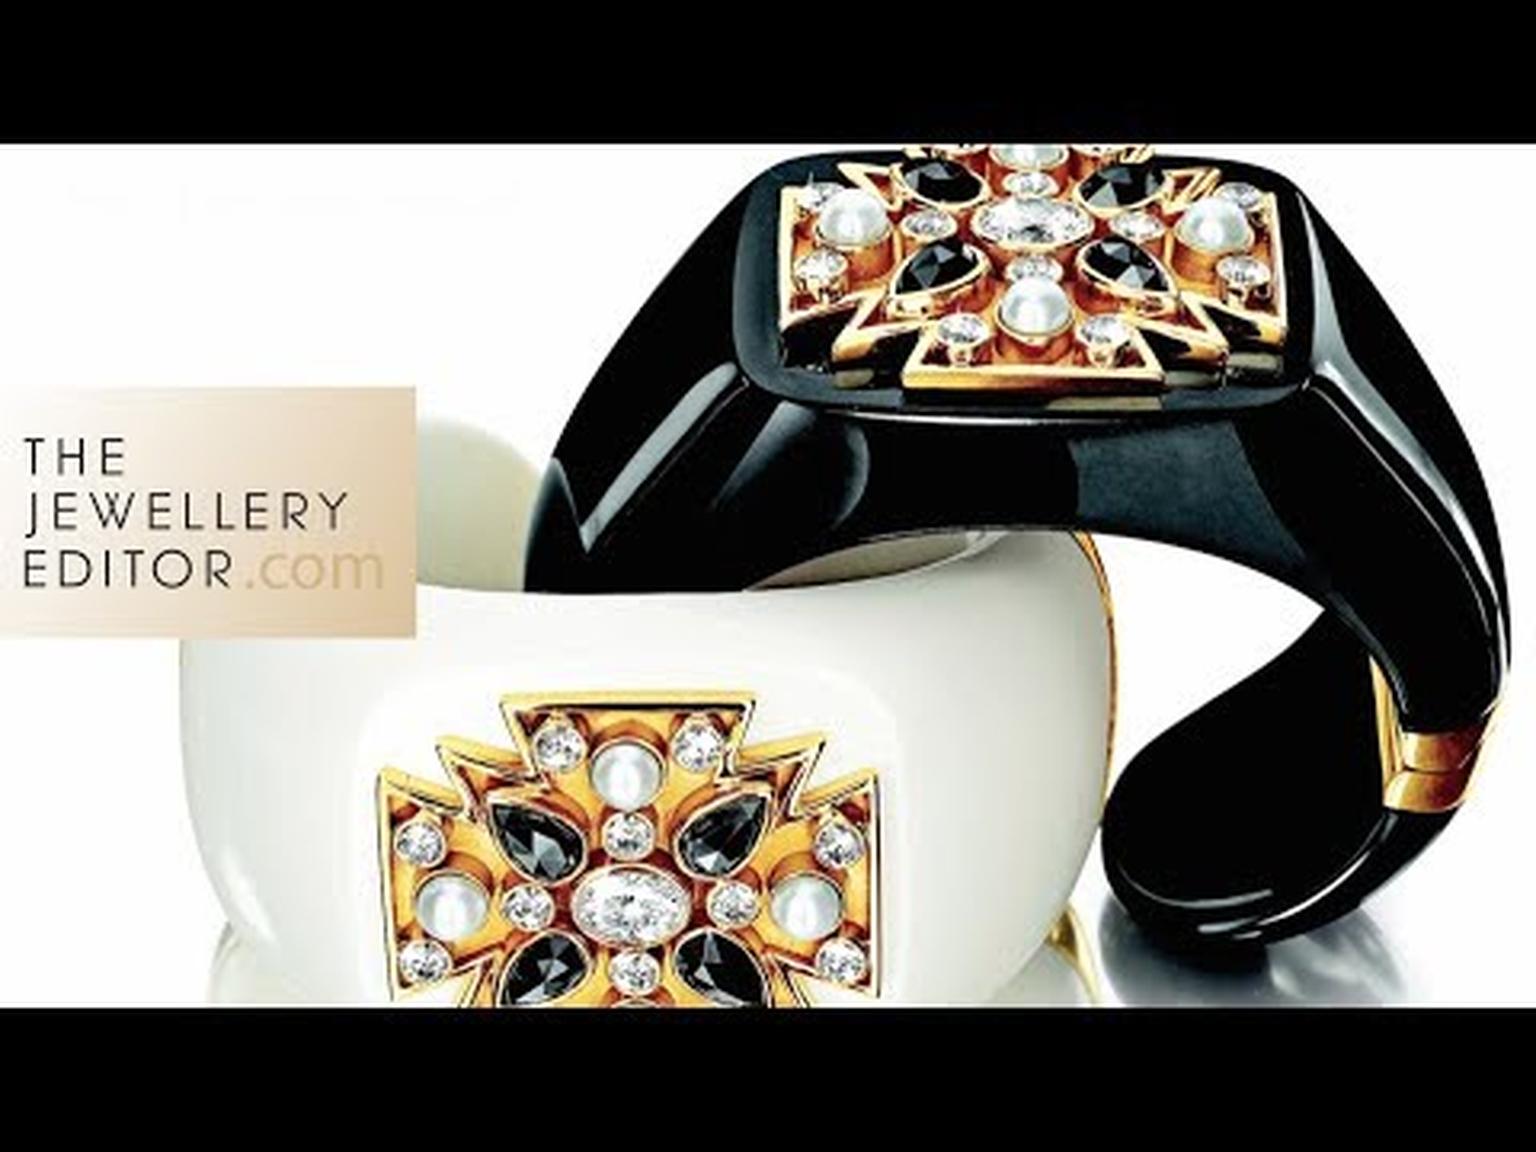 Masterpiece 2014 jewellery and watches Coming soon to London